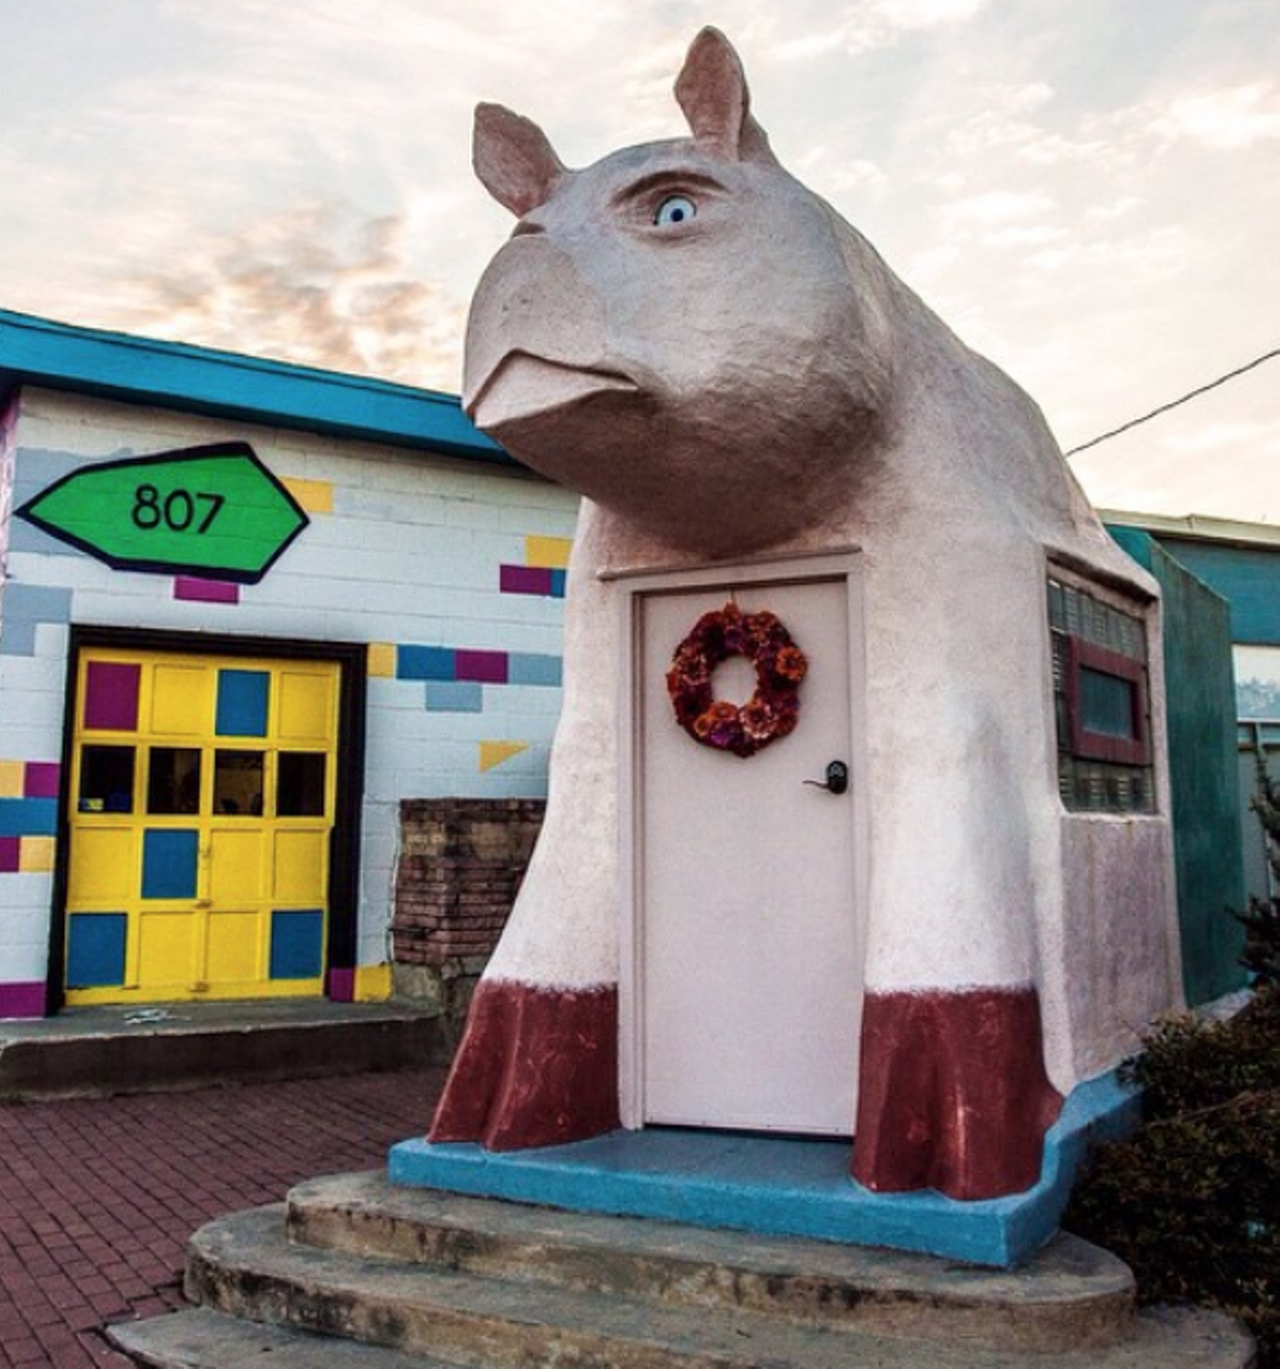 The former Frank’s Hog Stand
801 S Presa St
Though Frank’s Hog Stand has long since closed, the hog has kept on standing. Fashioned to look like a pig to grab people’s attention, the pig has been restored since its heyday in the 20th century and remains to be a favorite selfie spot of tourists and locals alike.
Photo via Instagram / jlg_atx